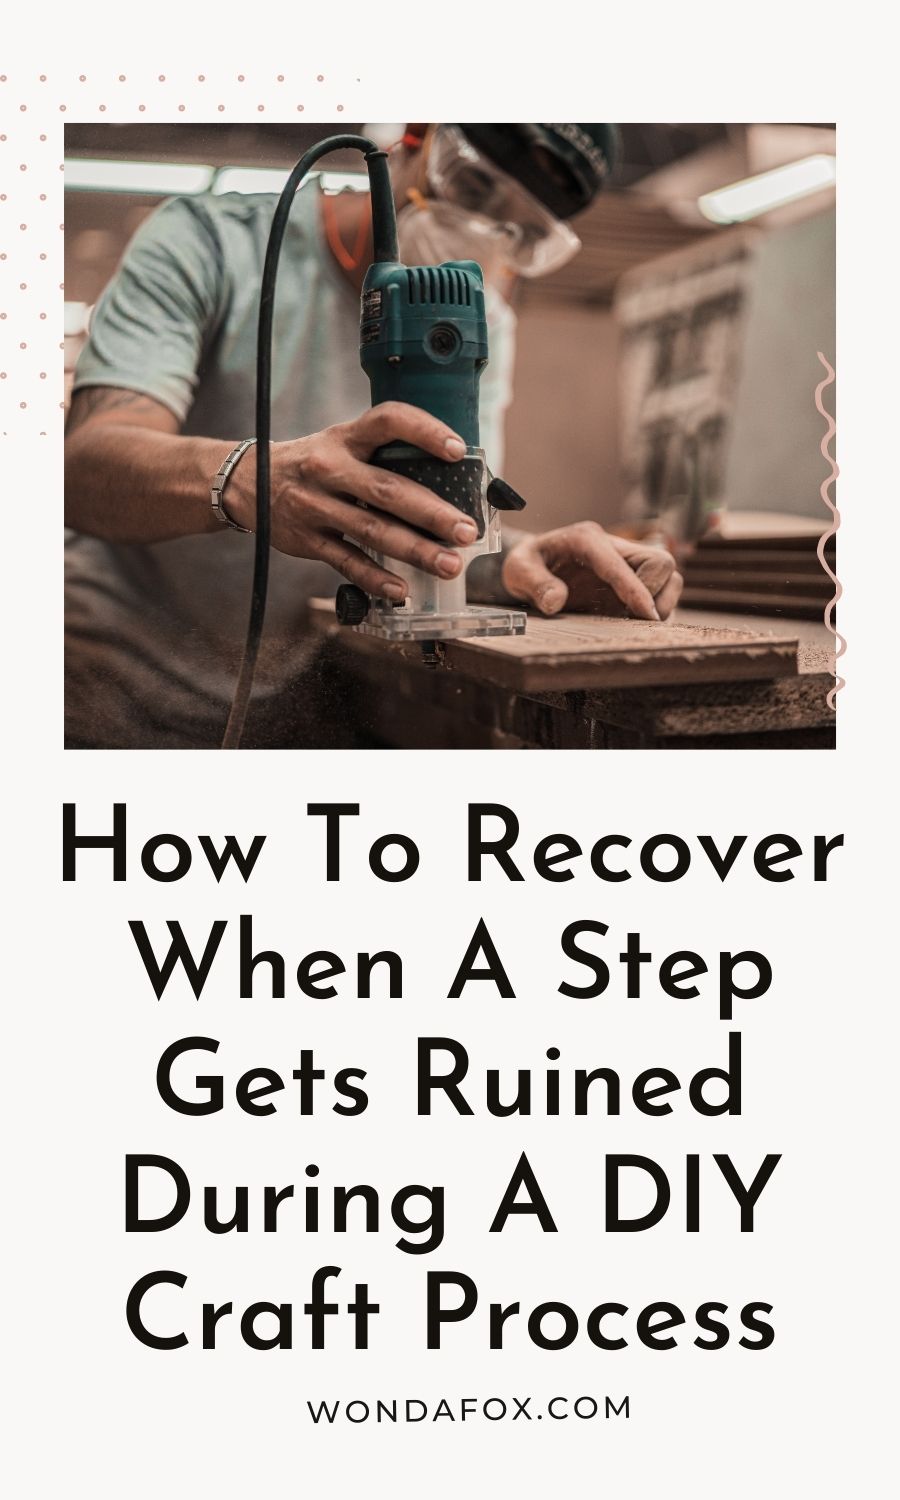 How to recover when a step gets ruined during a DIY craft process